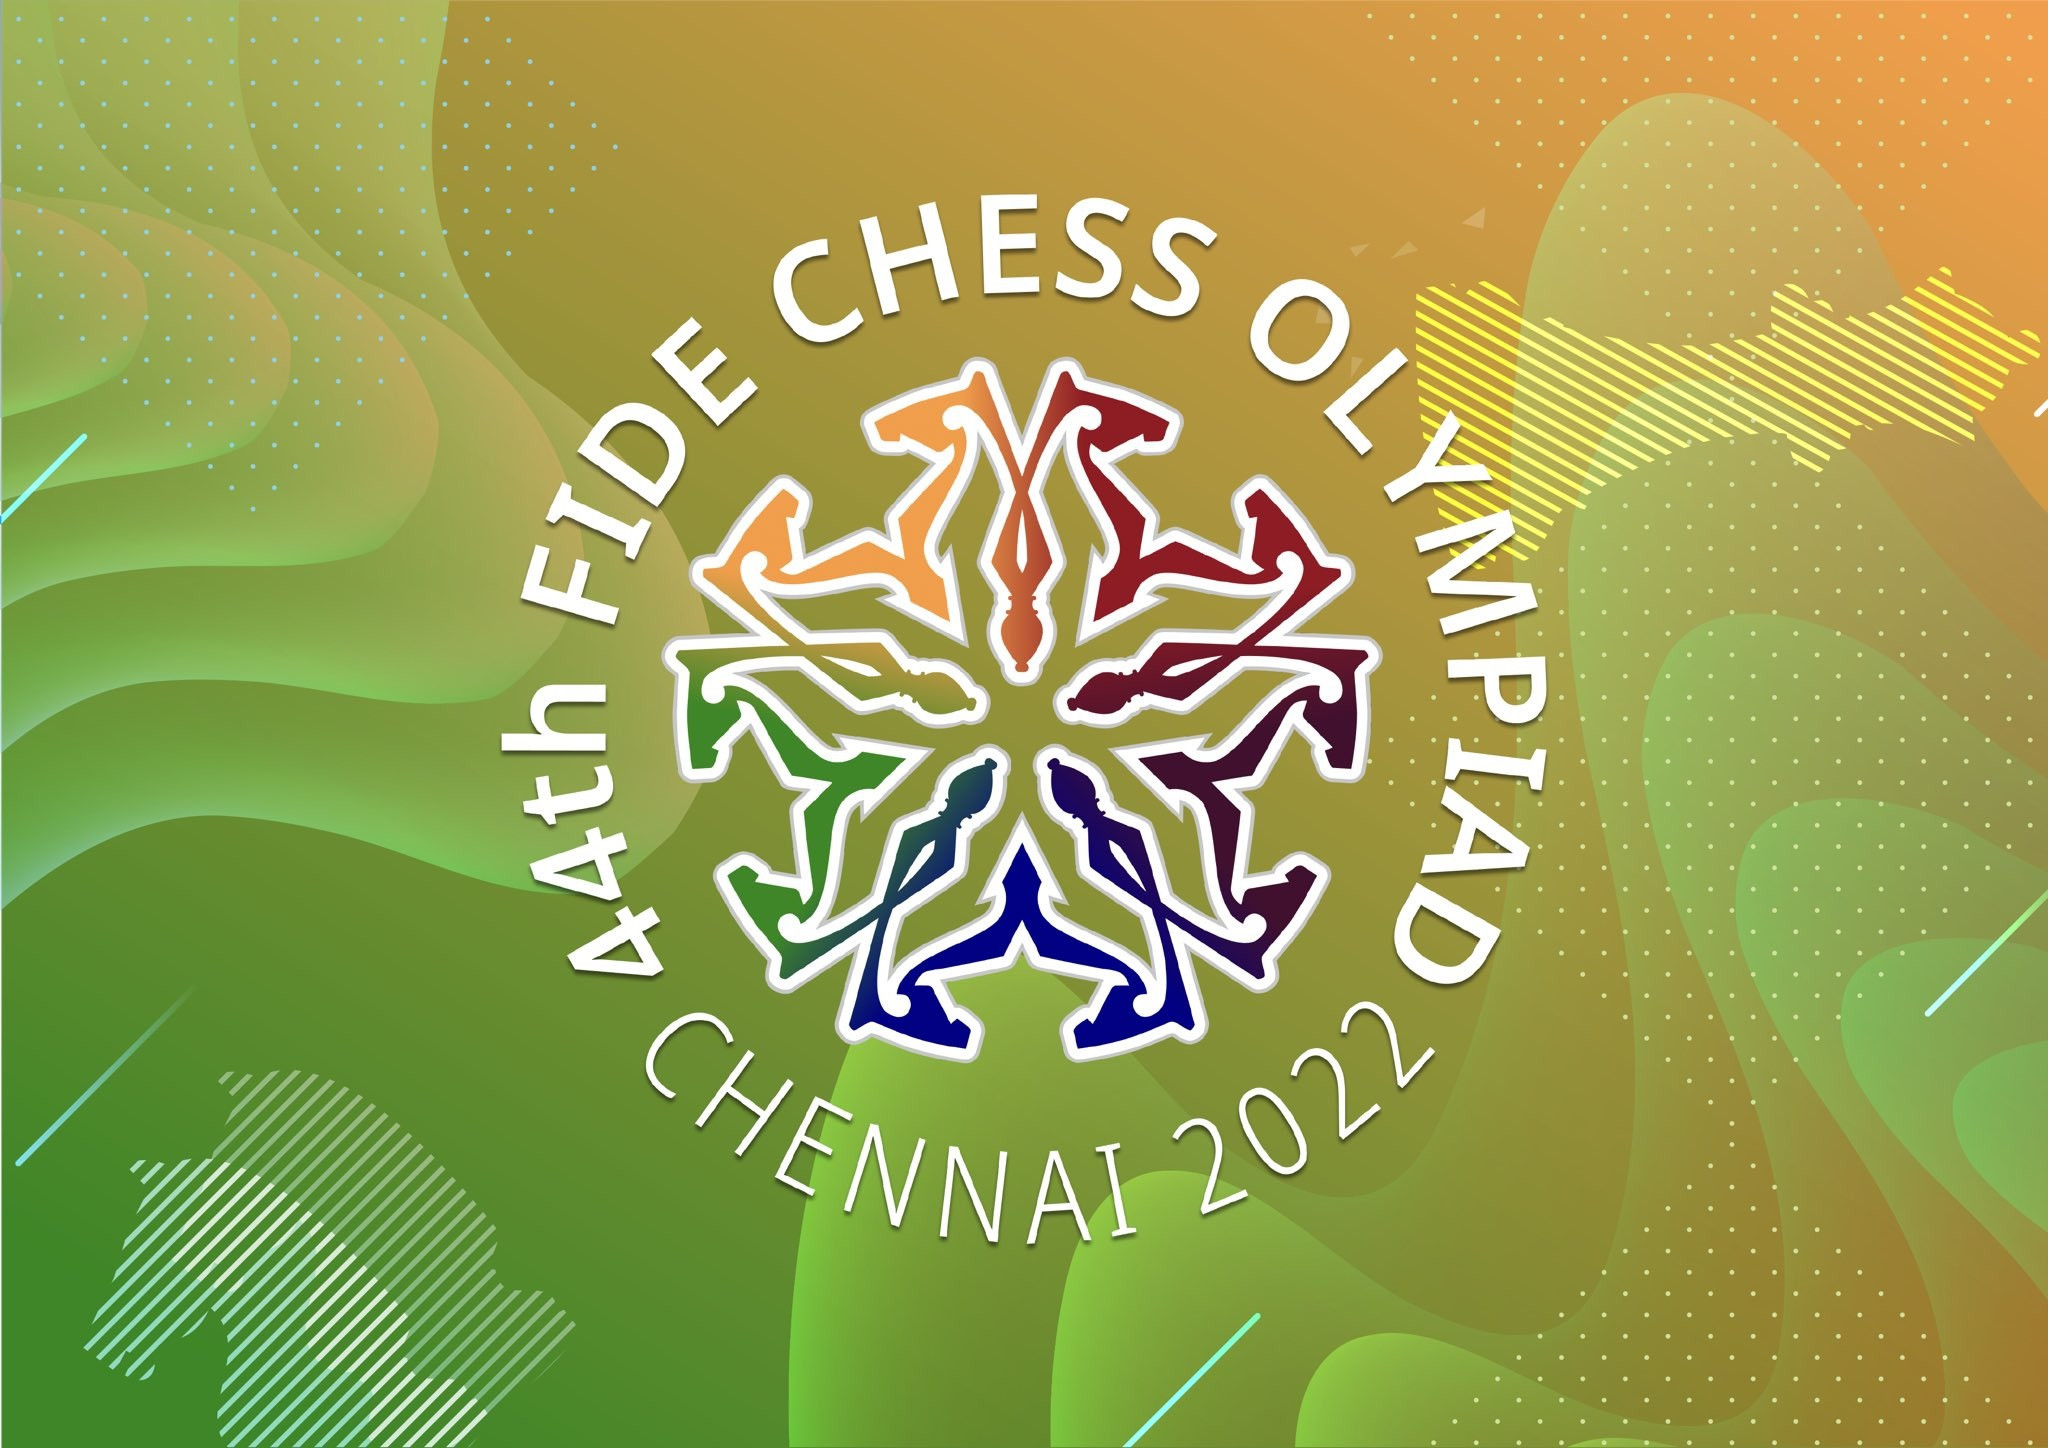 Record number of nations to compete at Chess Olympiad but no China